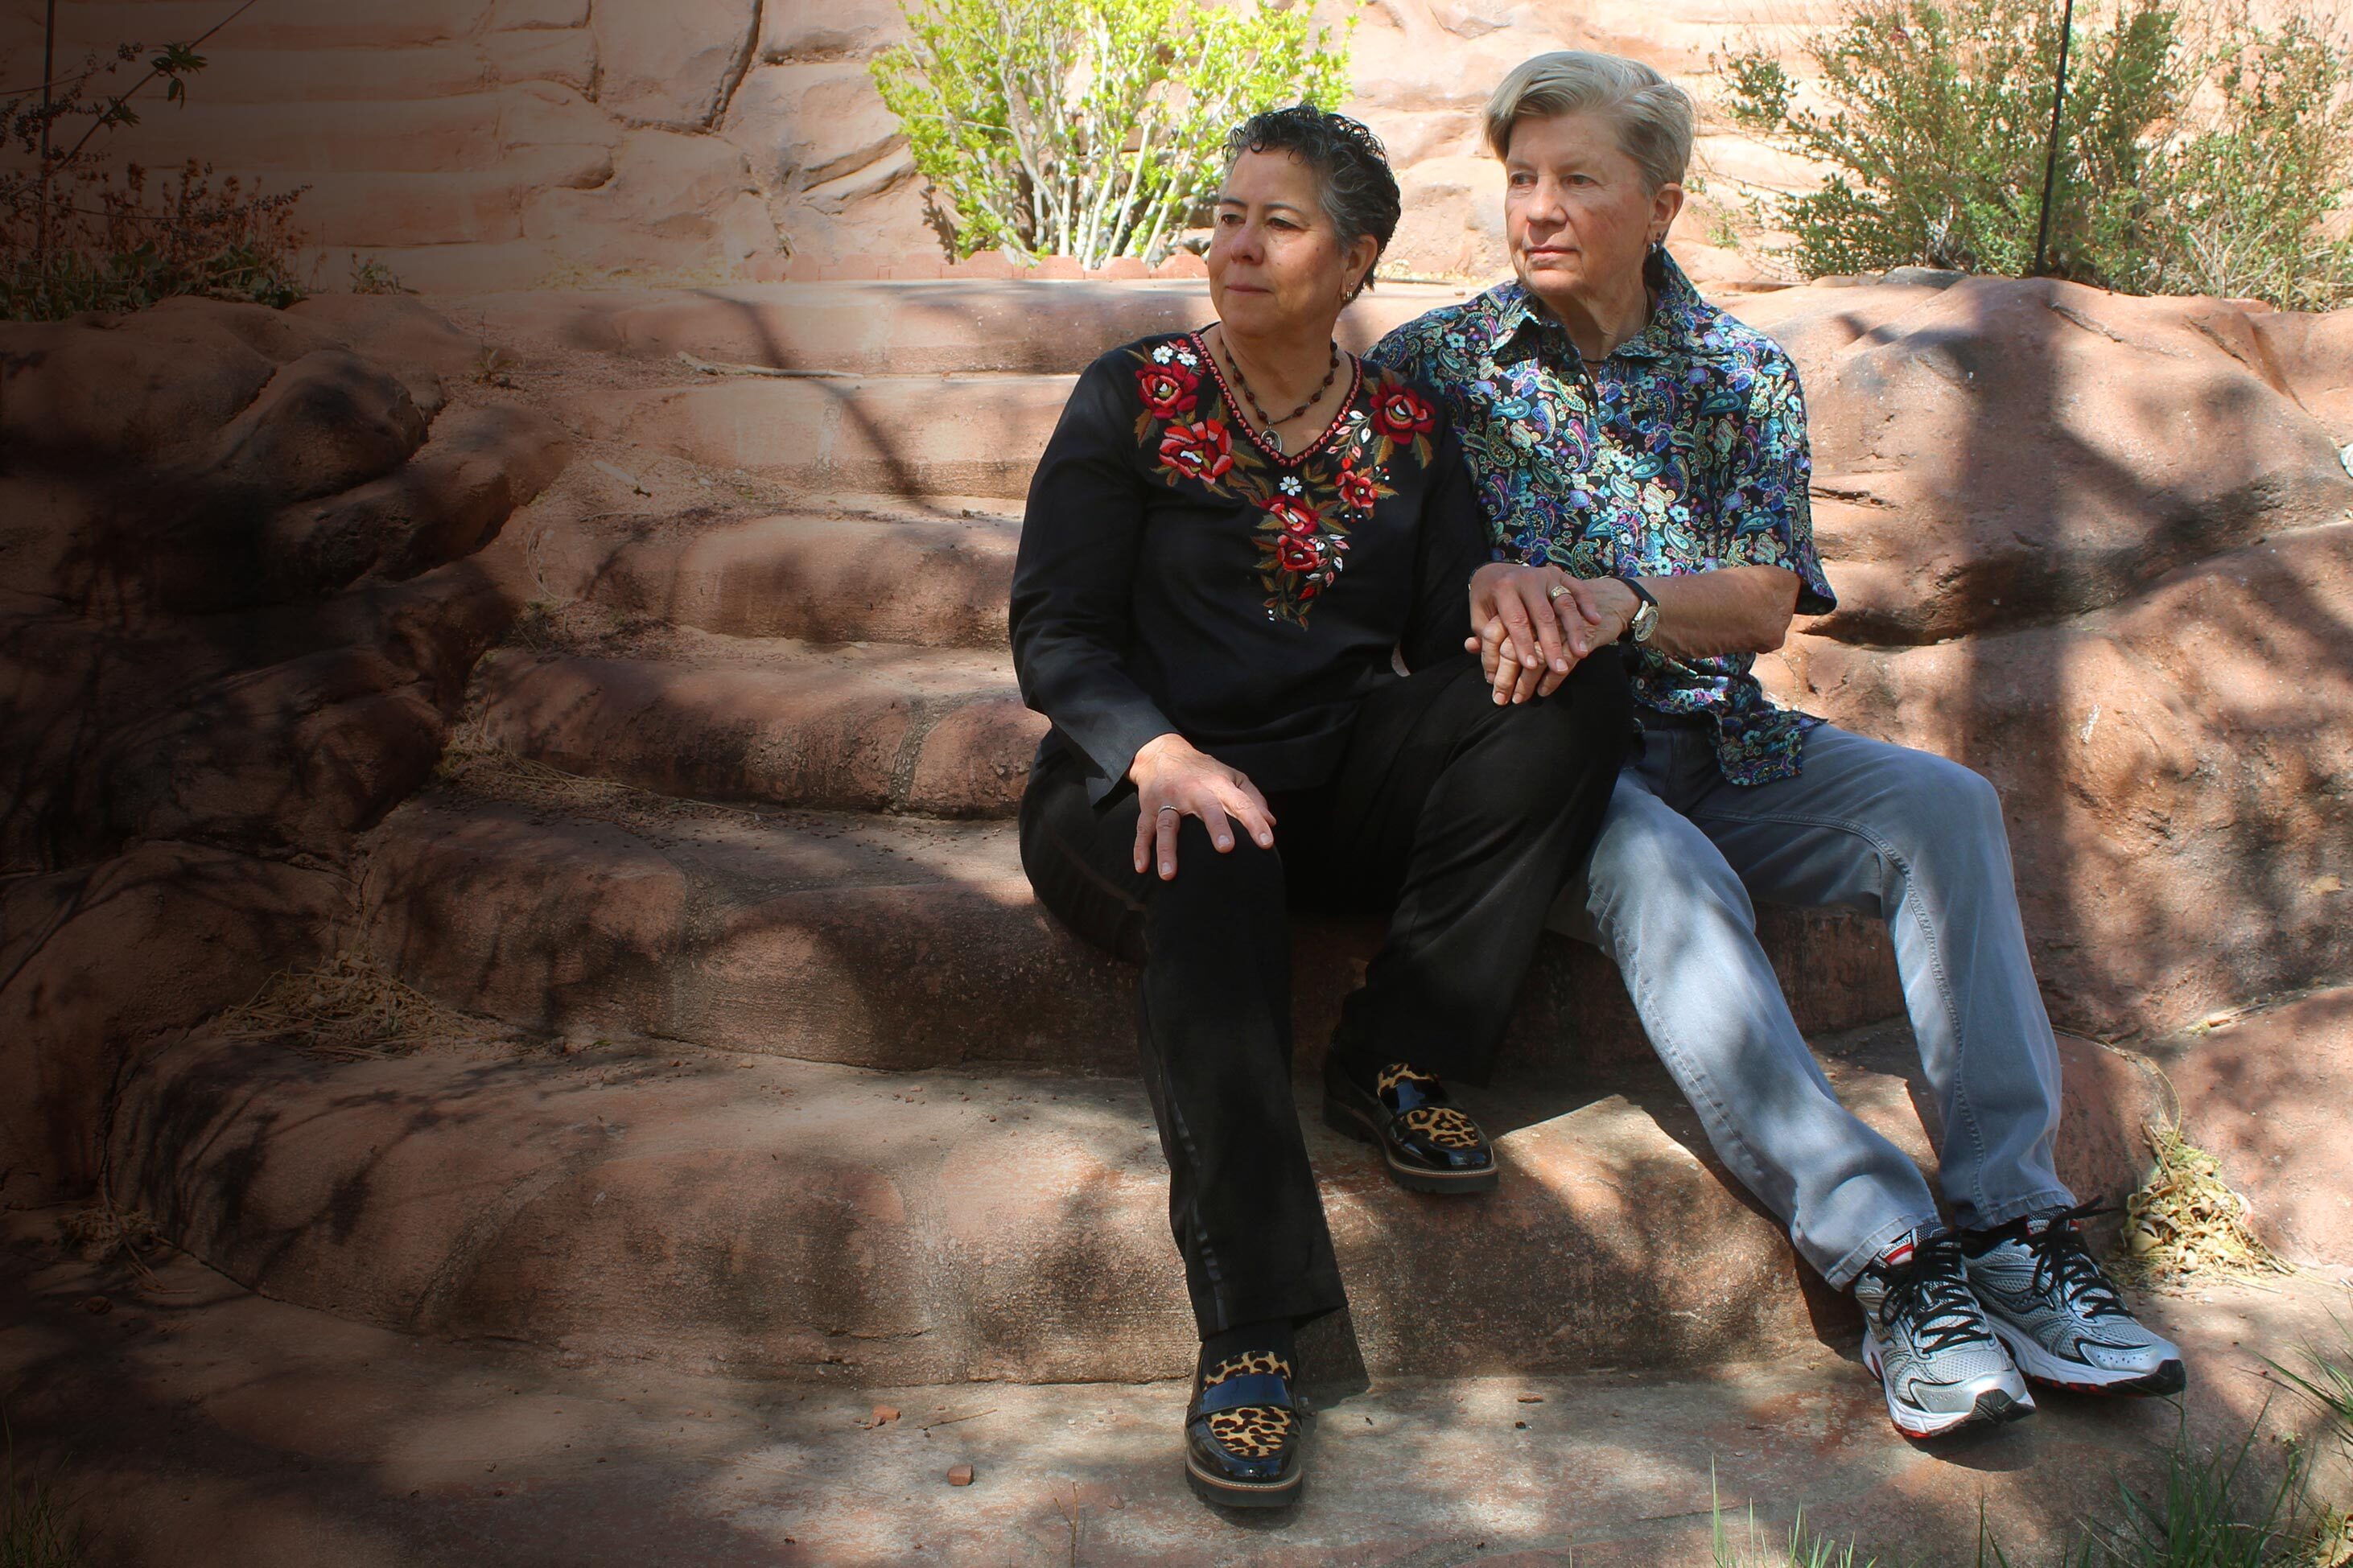 Norma Vázquez de Houdek (L) with wife, Mary Houdek at their home in Albuquerque, New Mexico.